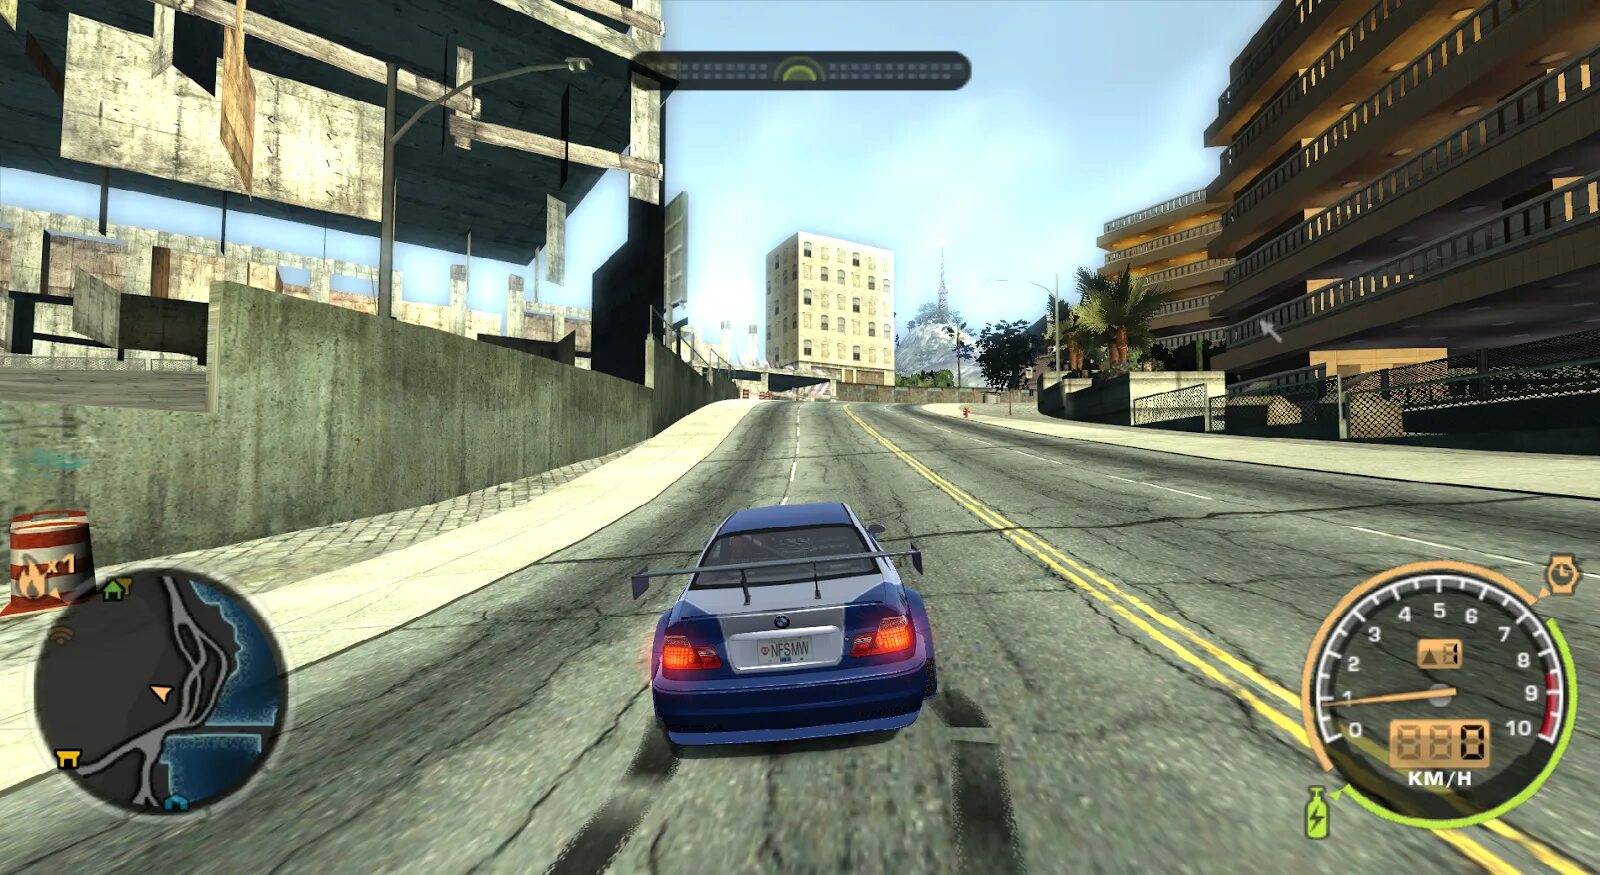 NFS MW Map 2005. NFS Toolkit most wanted. Rockport NFS MW. Номерной знак NFS most wanted.